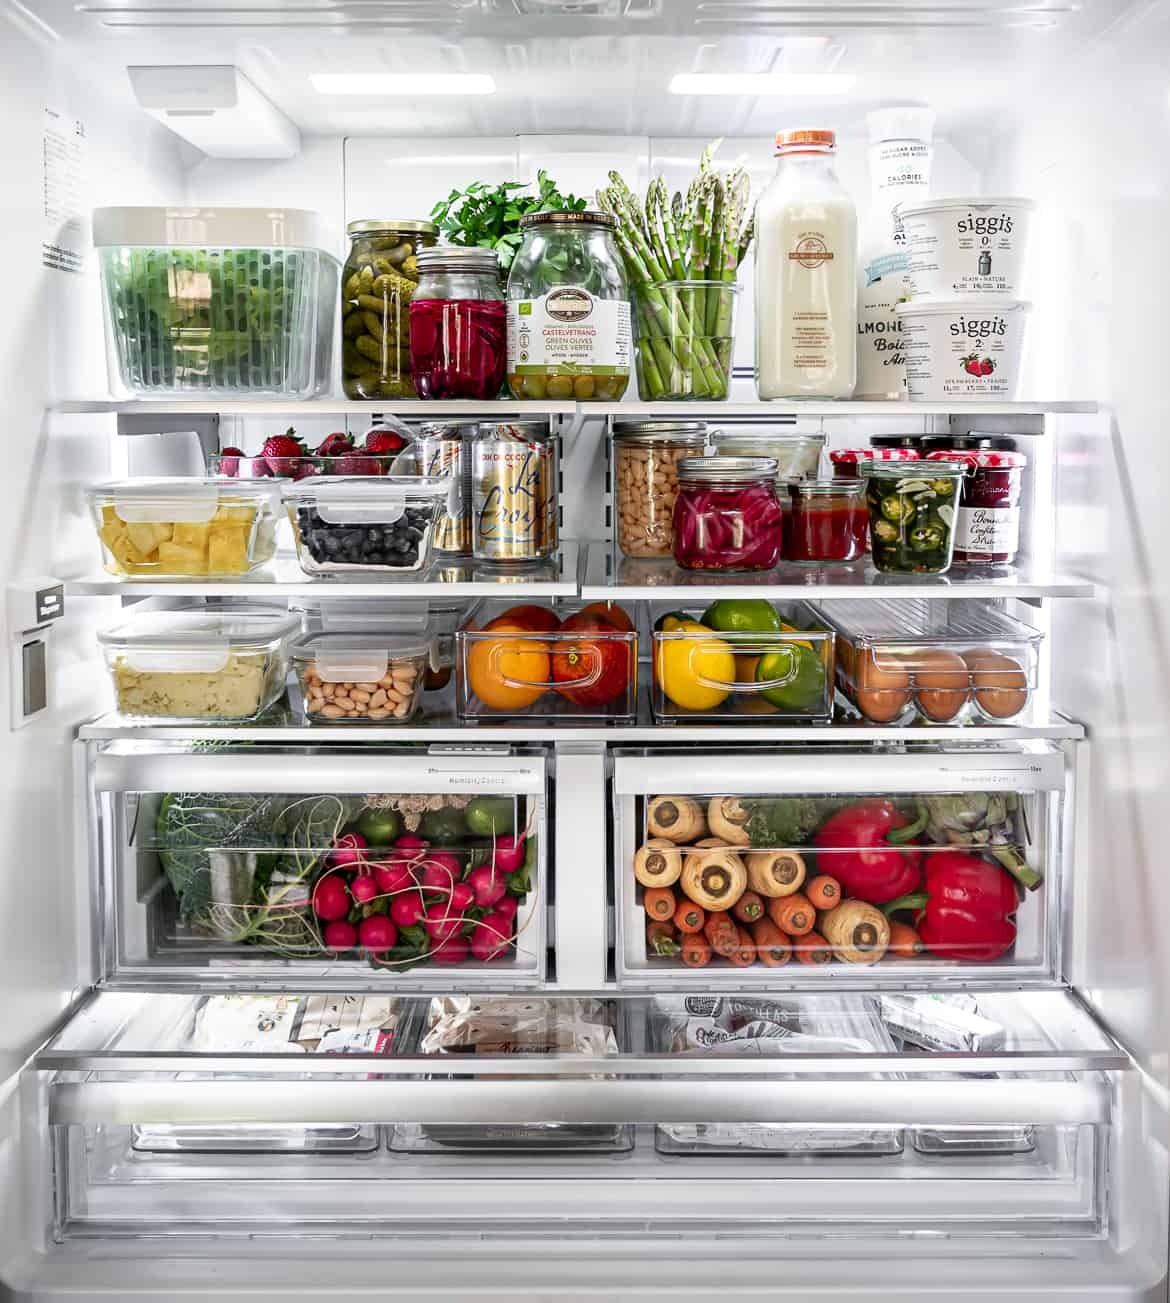 How to organize French door refrigerator?